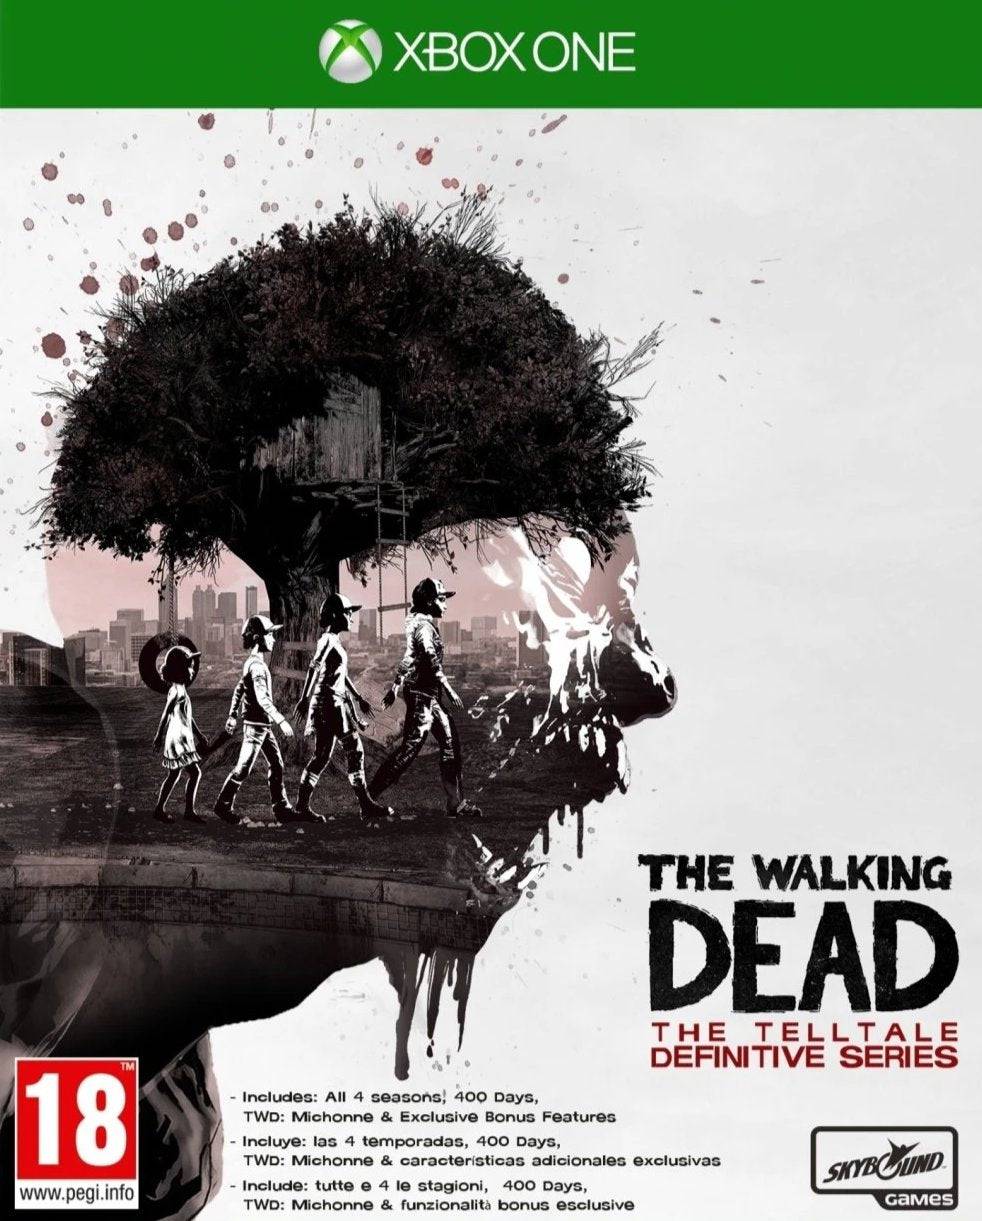 Xbox One The Walking Dead-The Telltale Definitive Series - Albagame